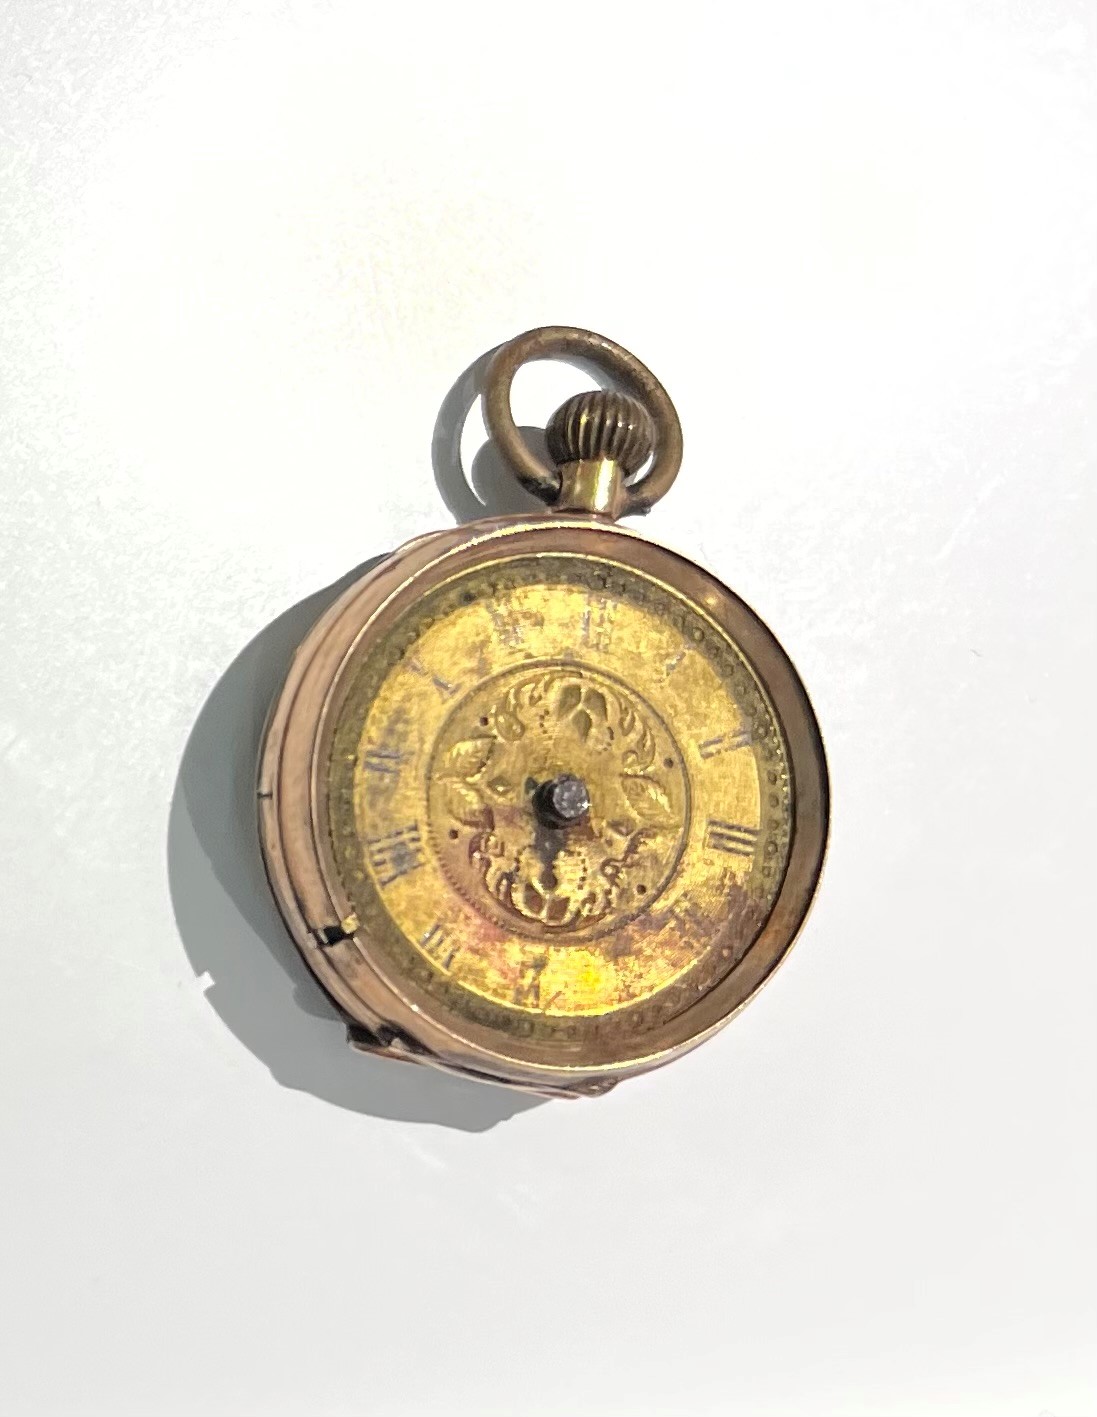 image of alfreds pocket watch